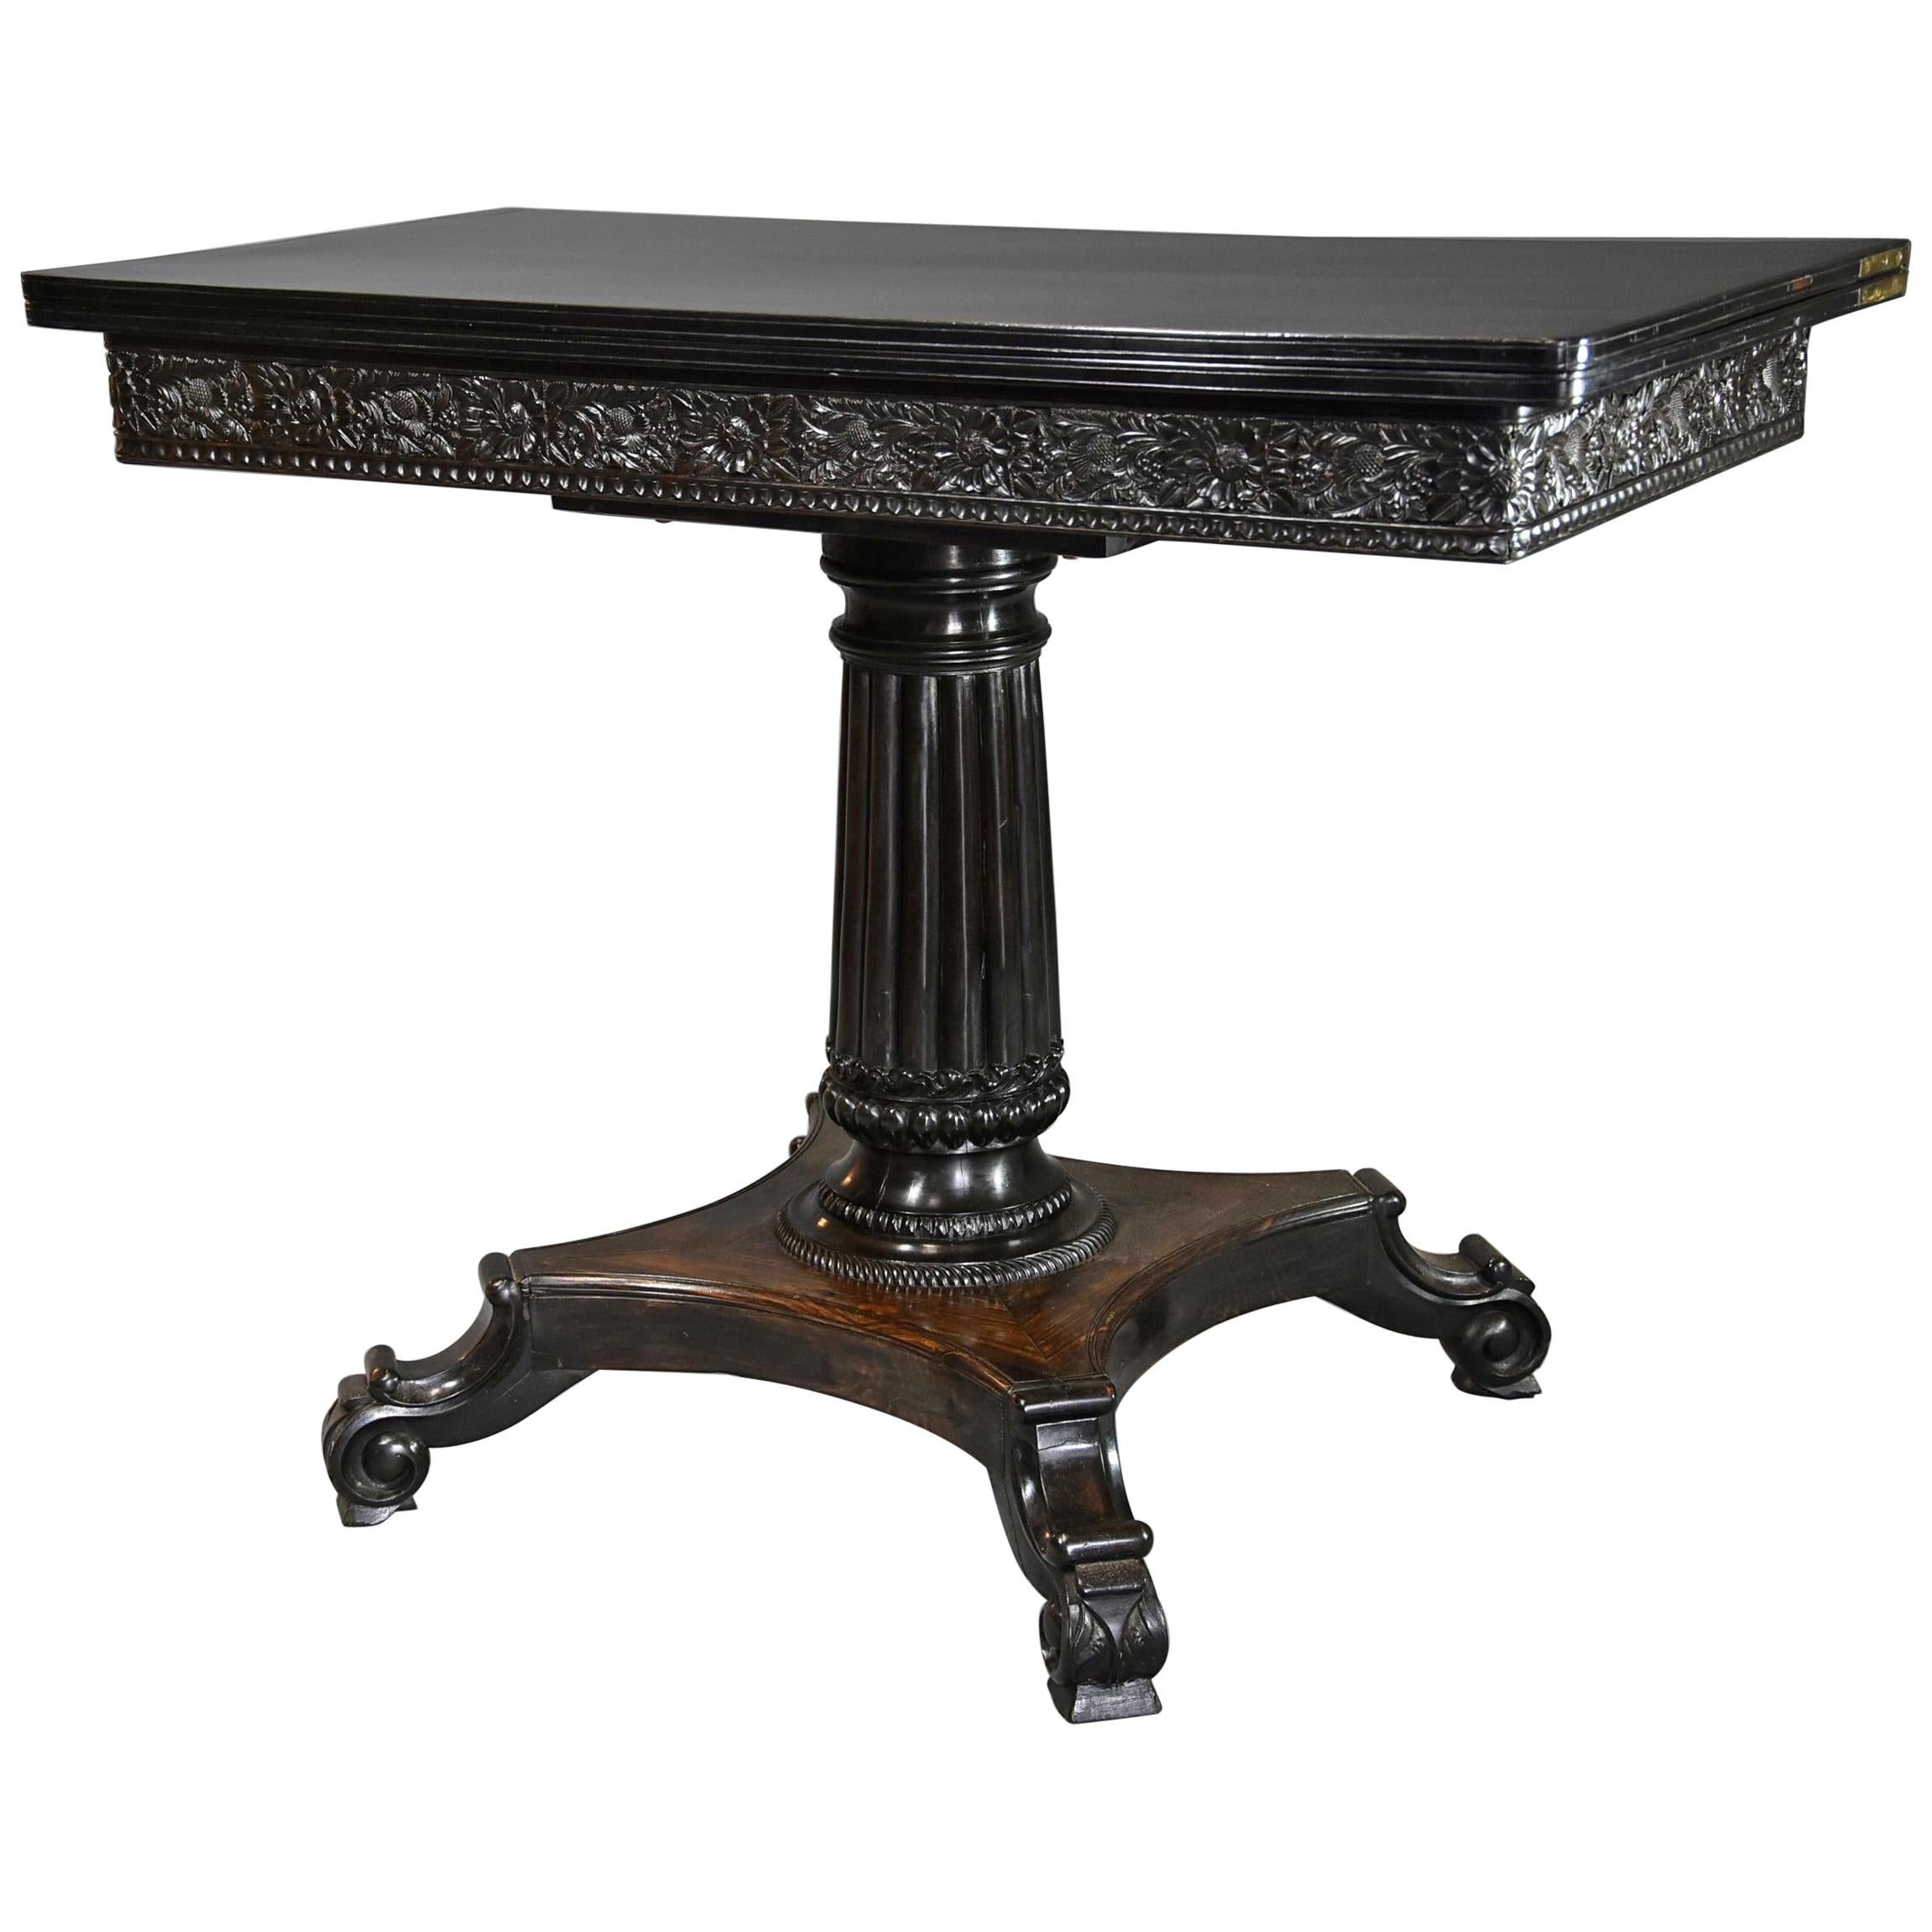 Rare 19th Century Ceylonese Solid Ebony Card/Games Table from the Galle District